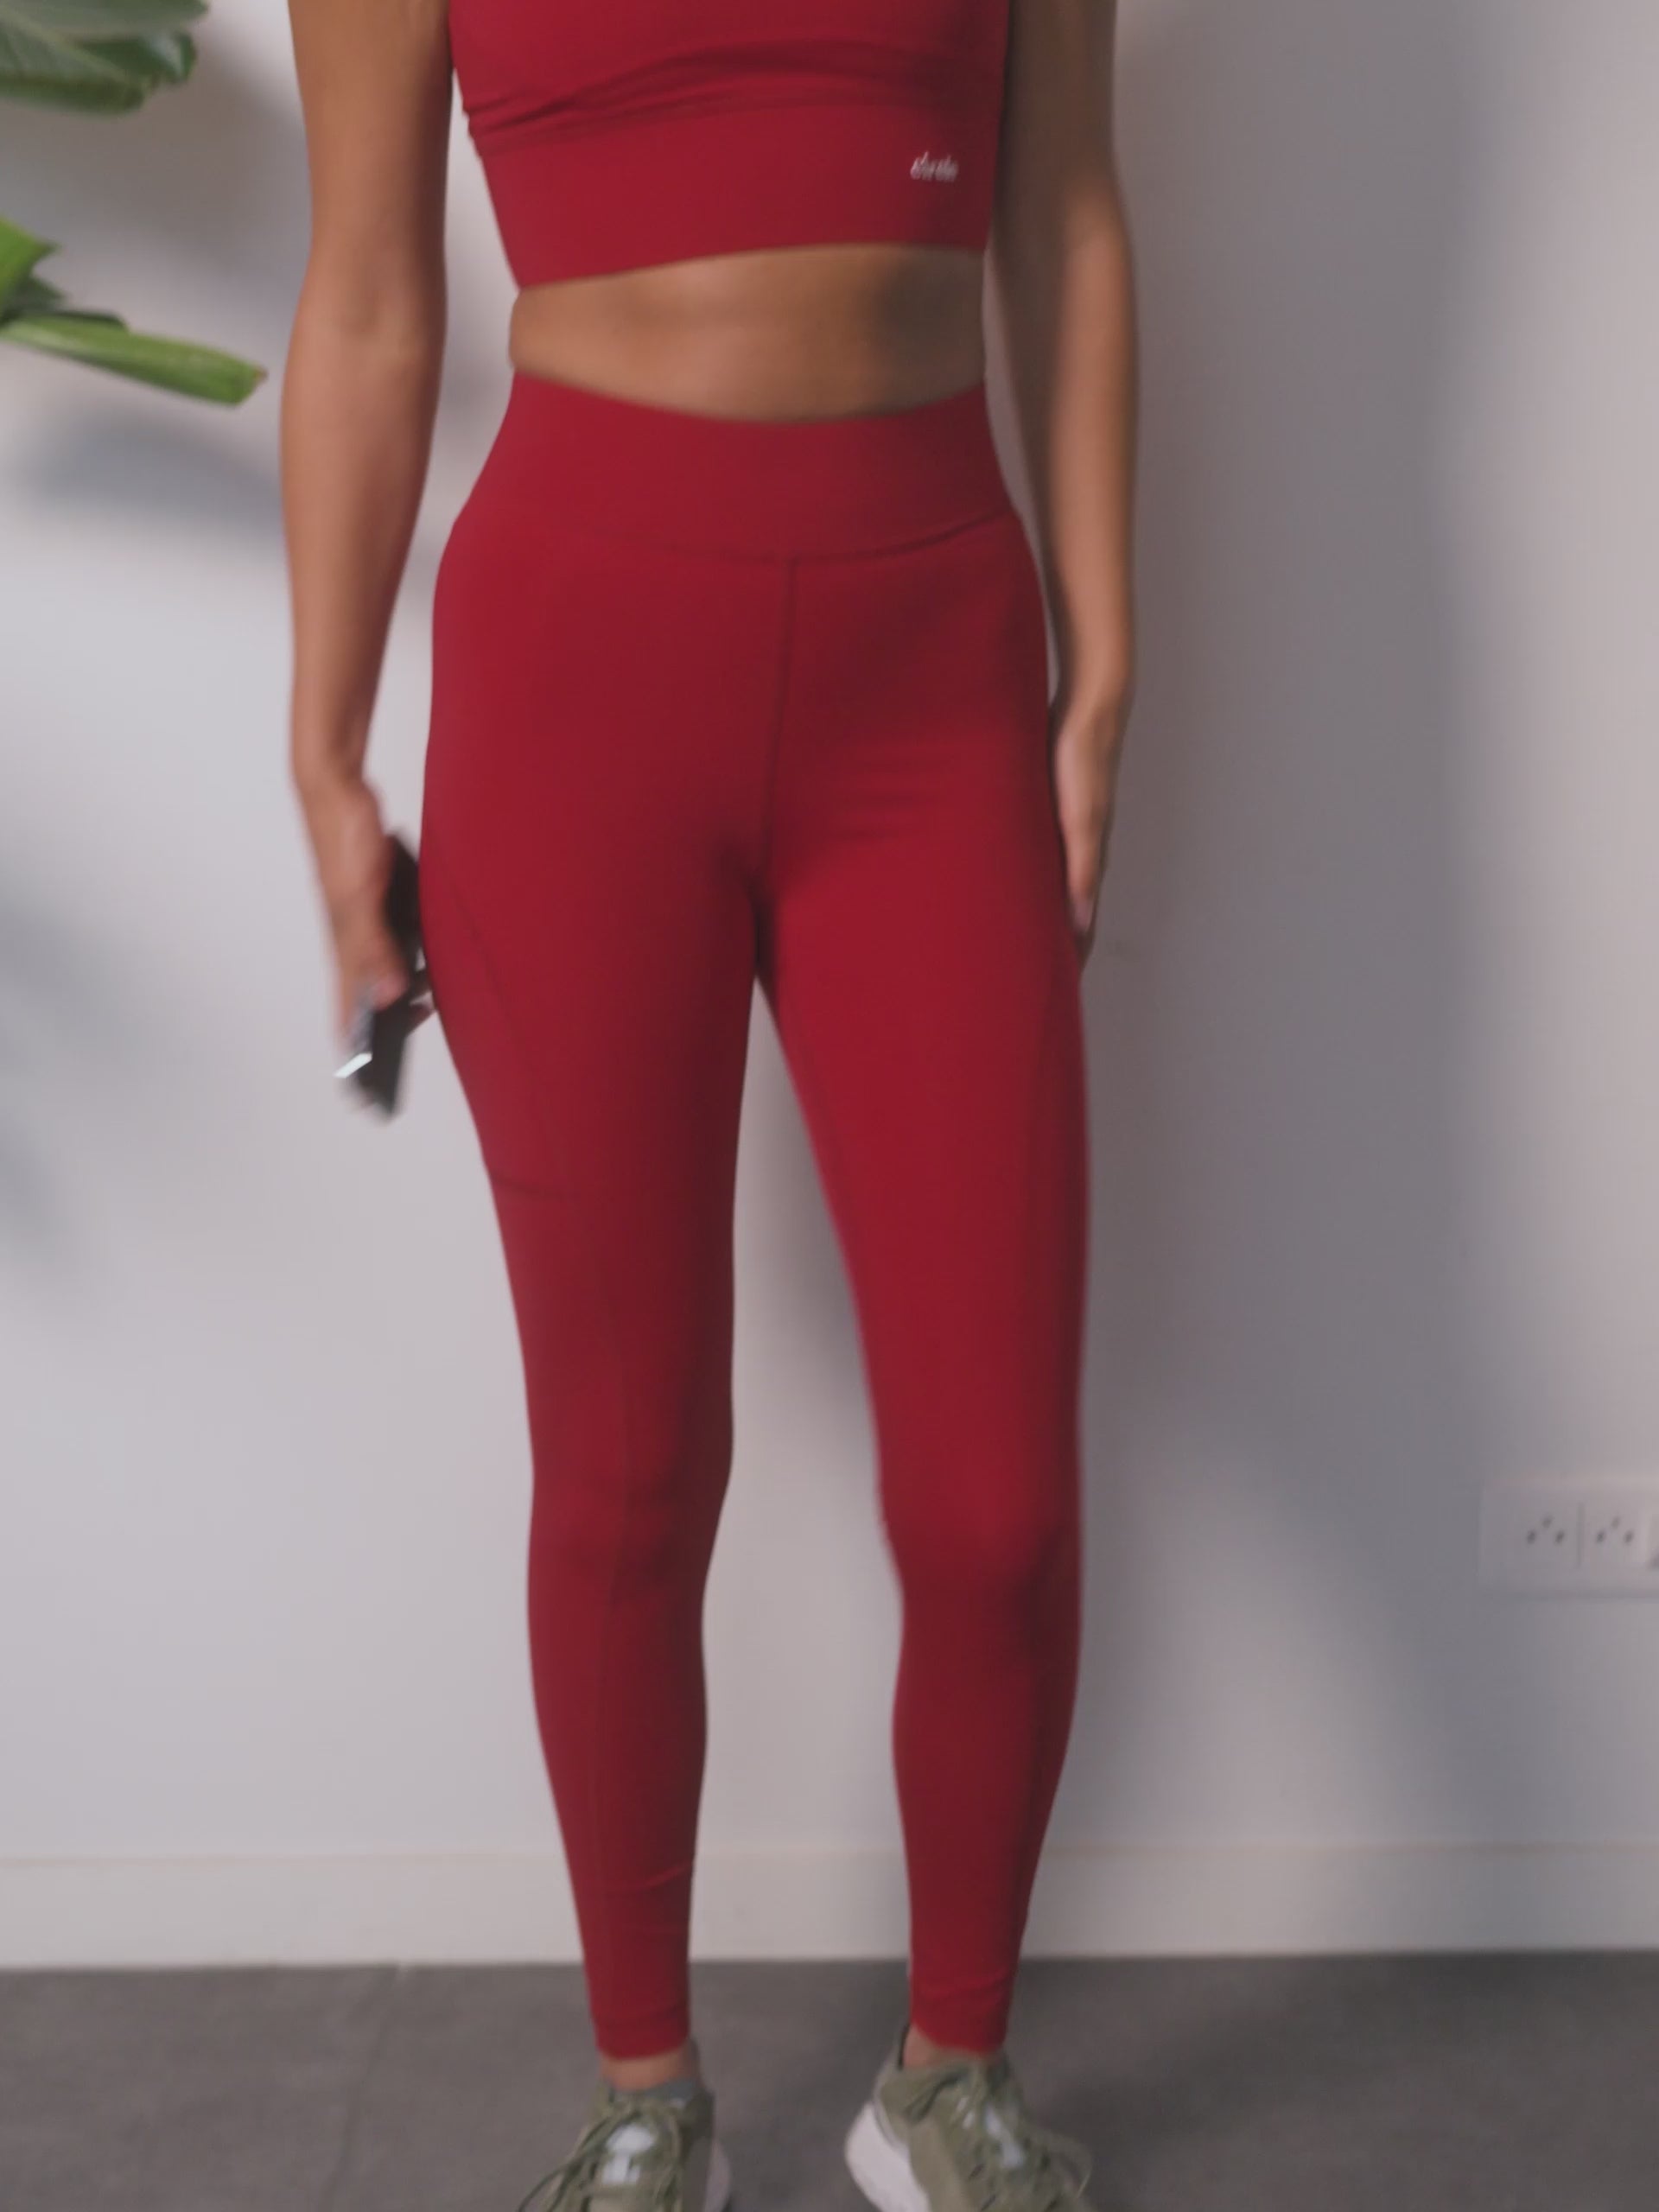 legging_get_in_shape_64_cherry_red_2.mp4